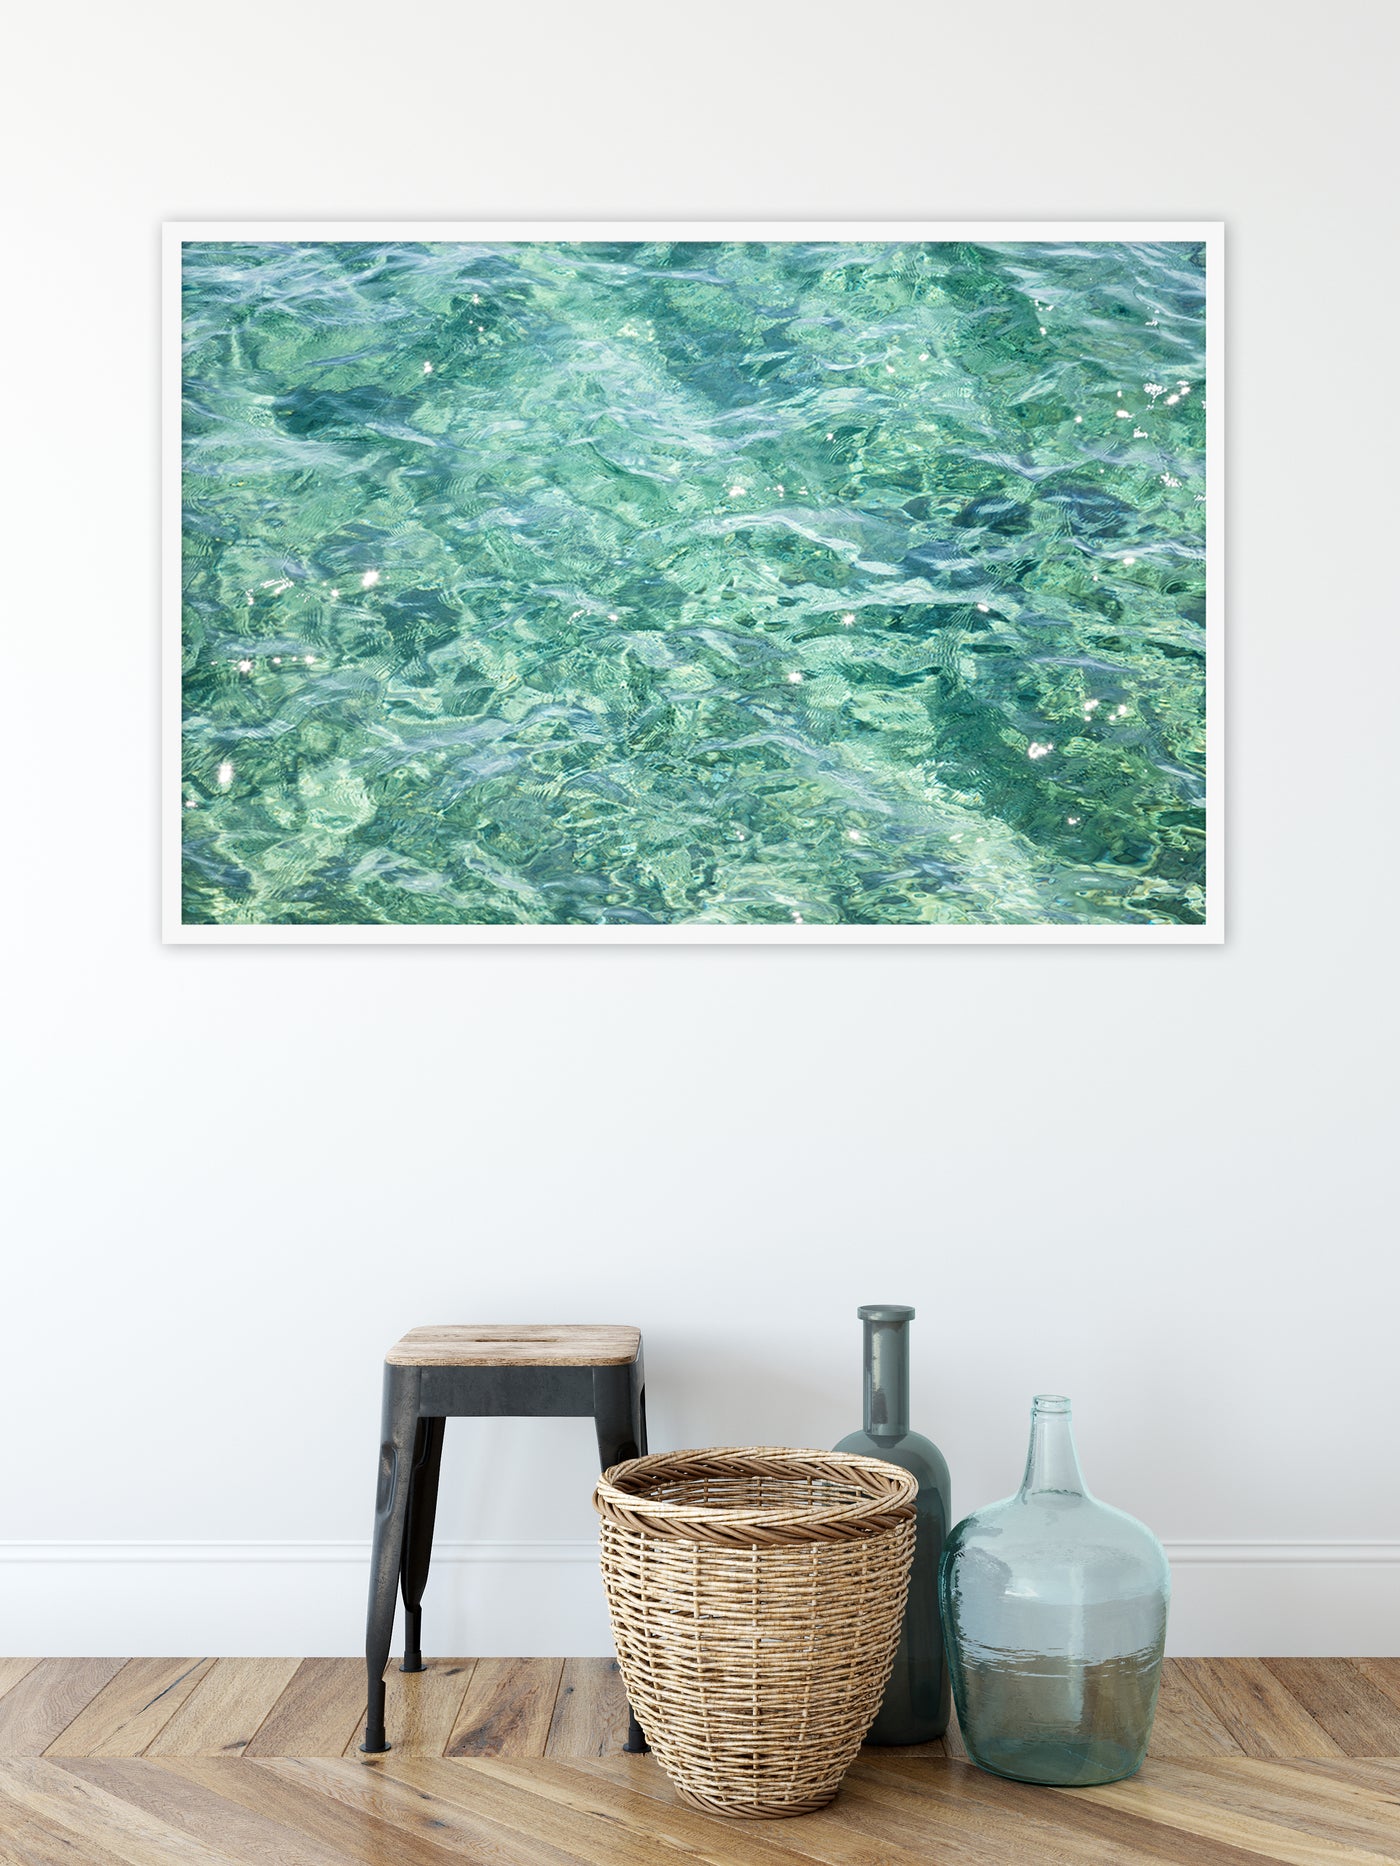 Large framed mint green water abstract art print in neutral colored home